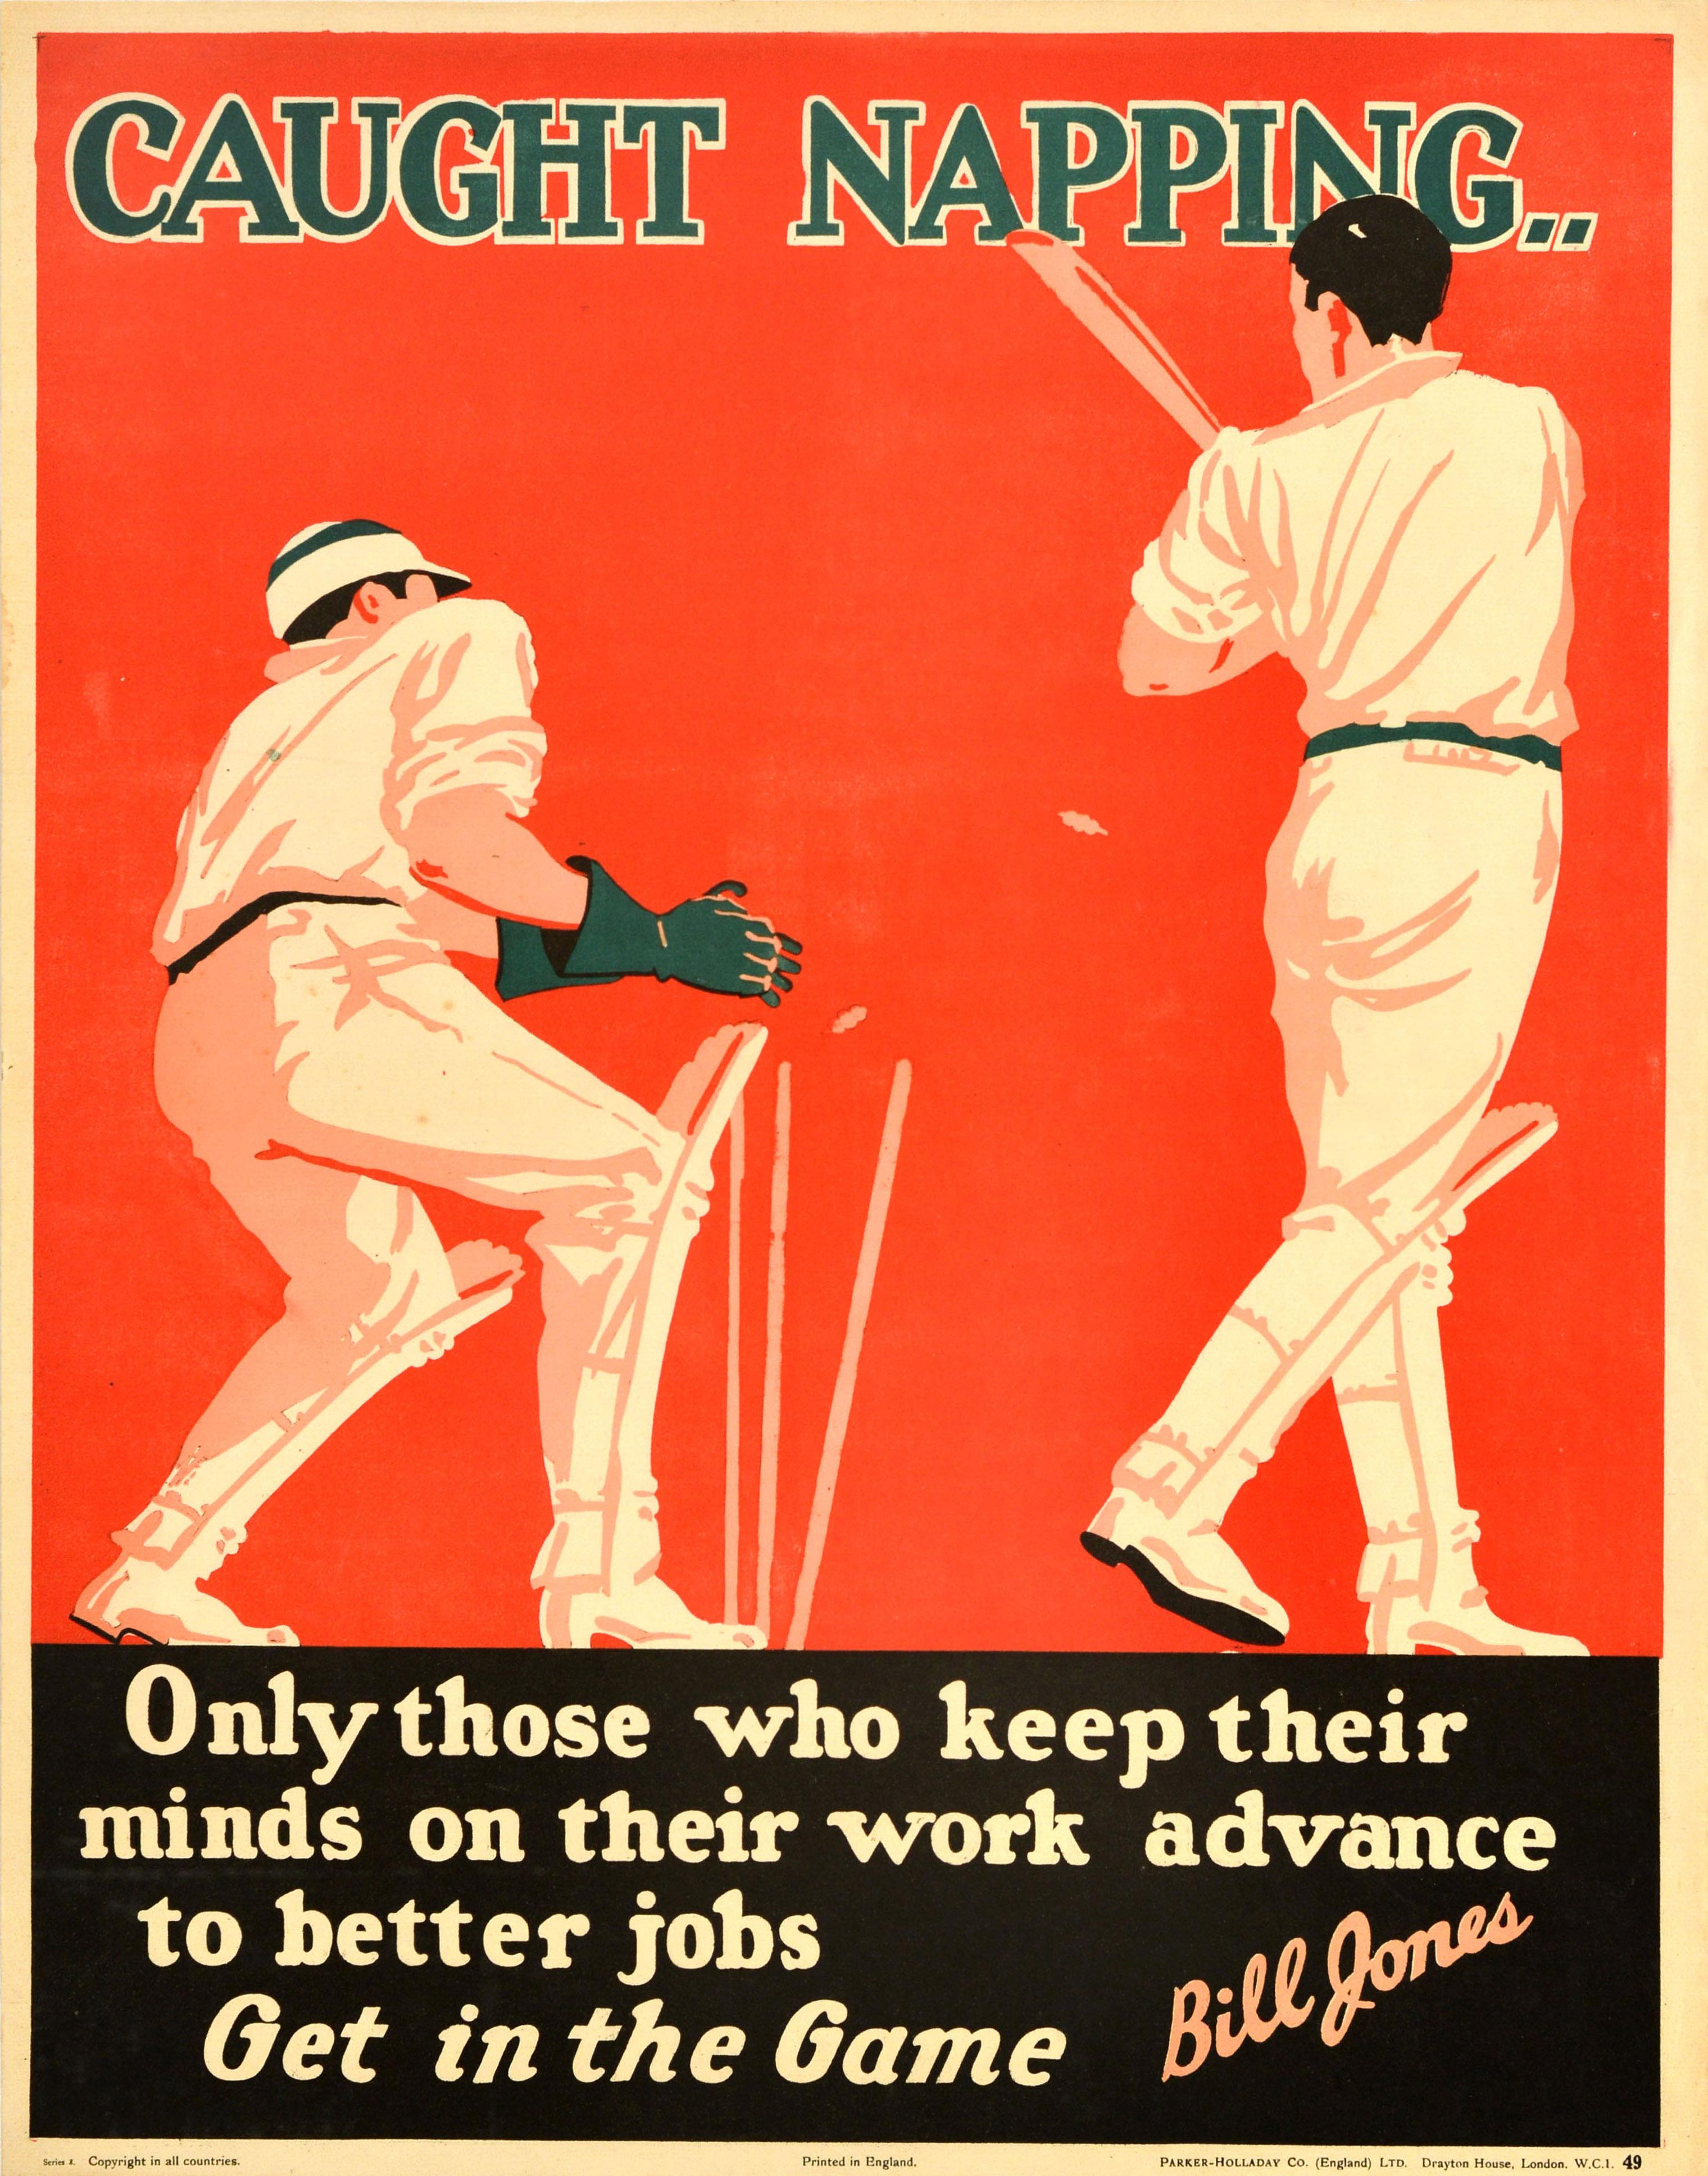 Unknown Print - Original Vintage Workplace Motivational Poster Caught Napping Cricket Bill Jones